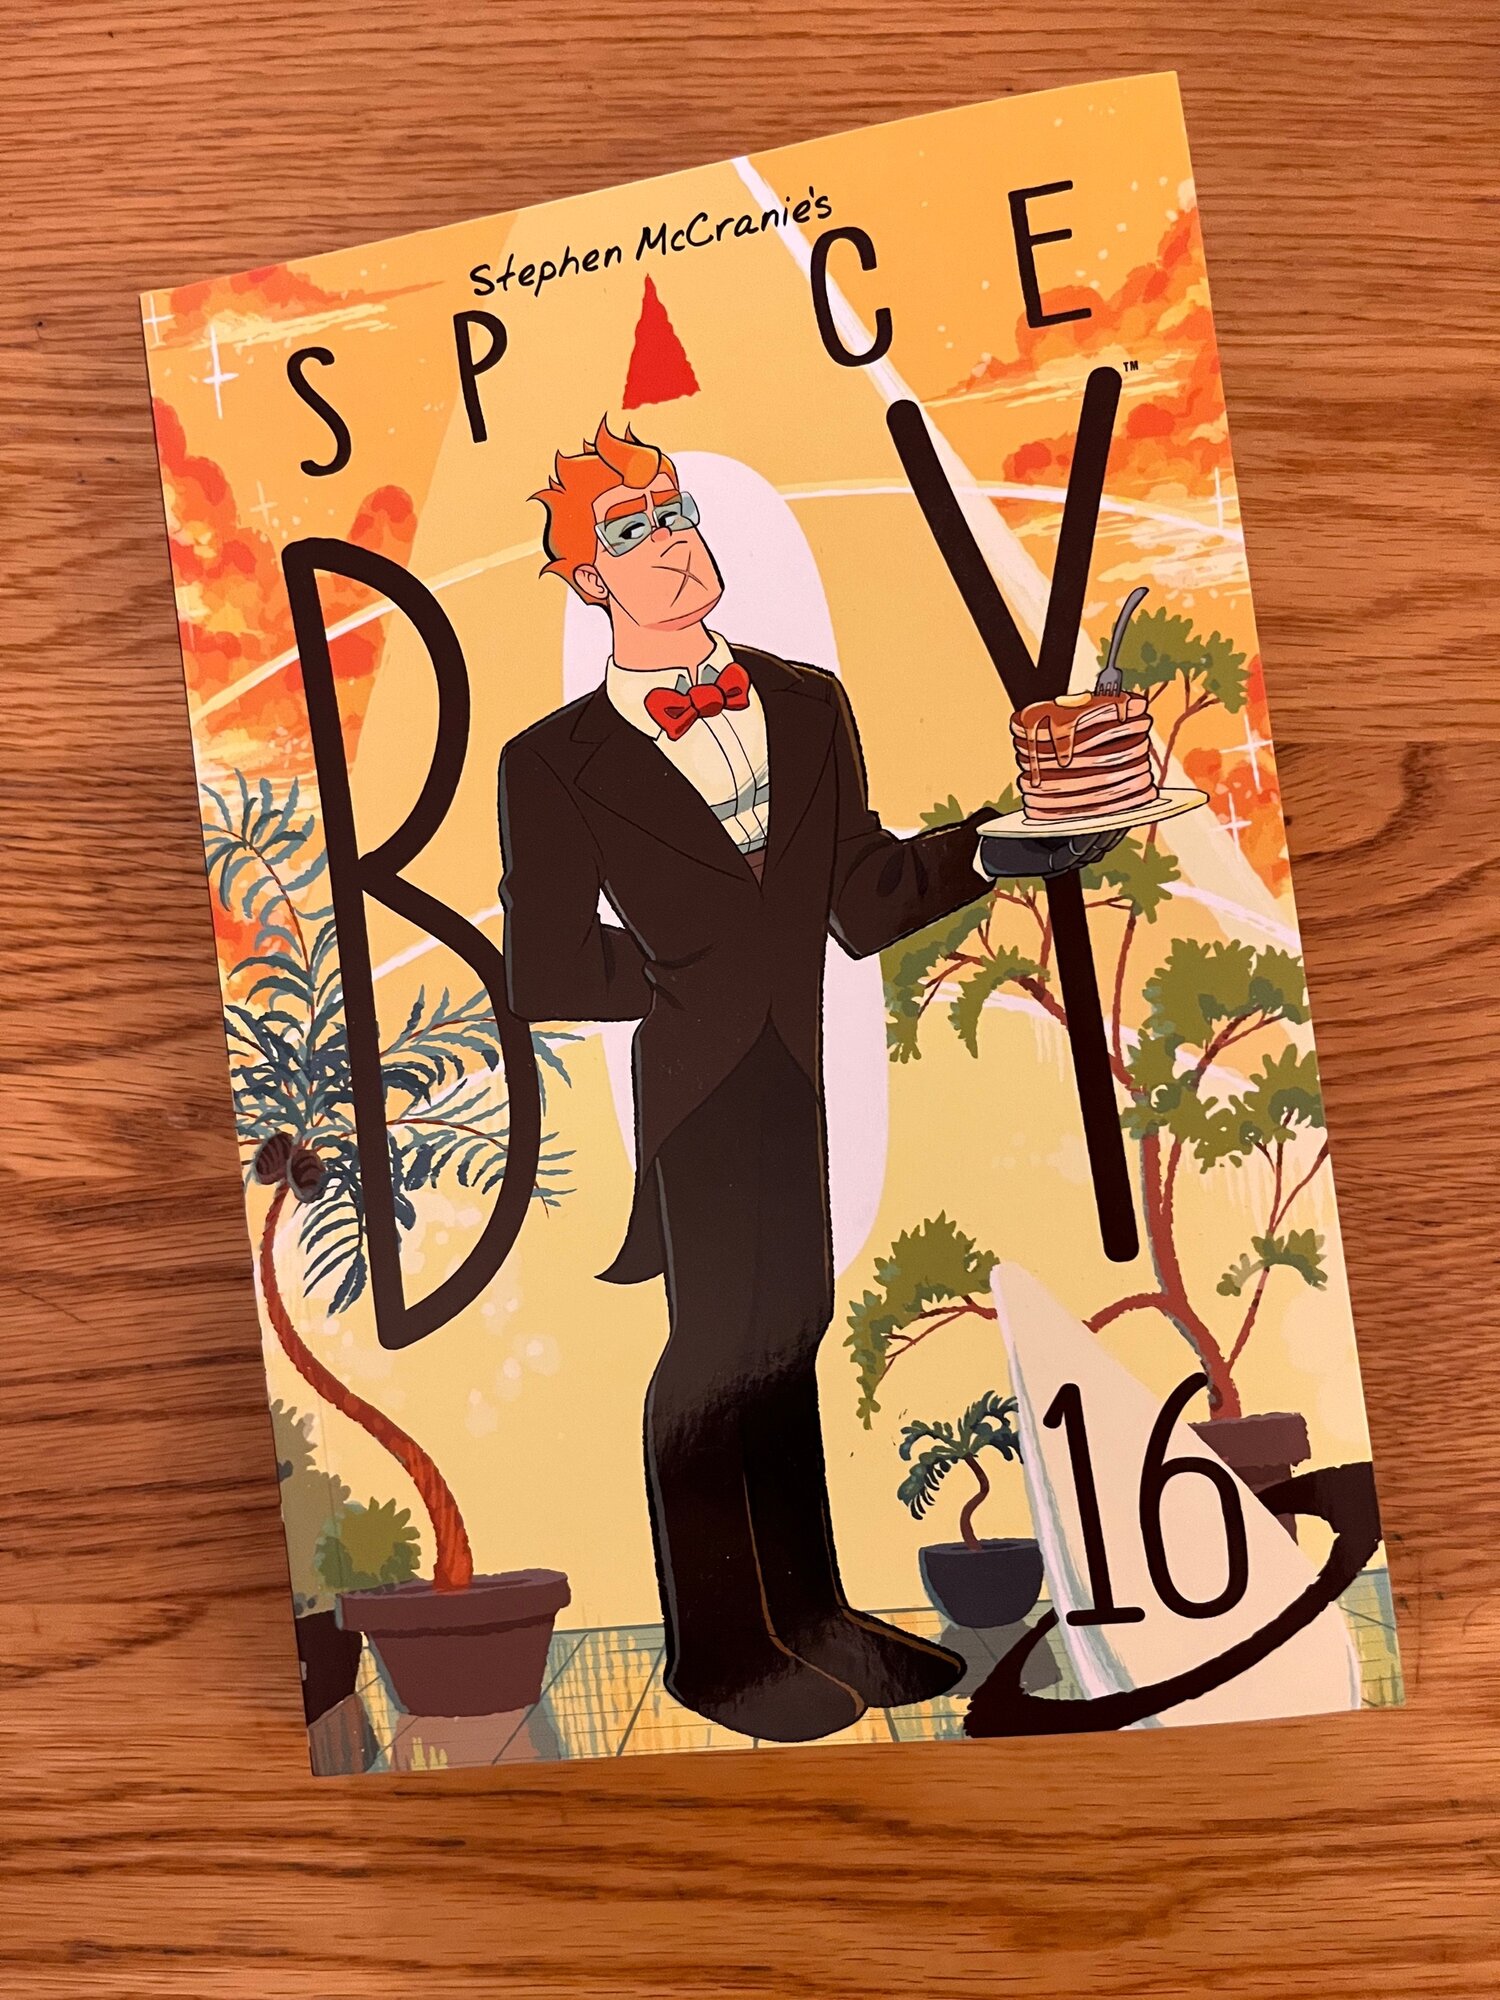 Space Boy Art & Literature Kit — Big Picture Gallery and Studio